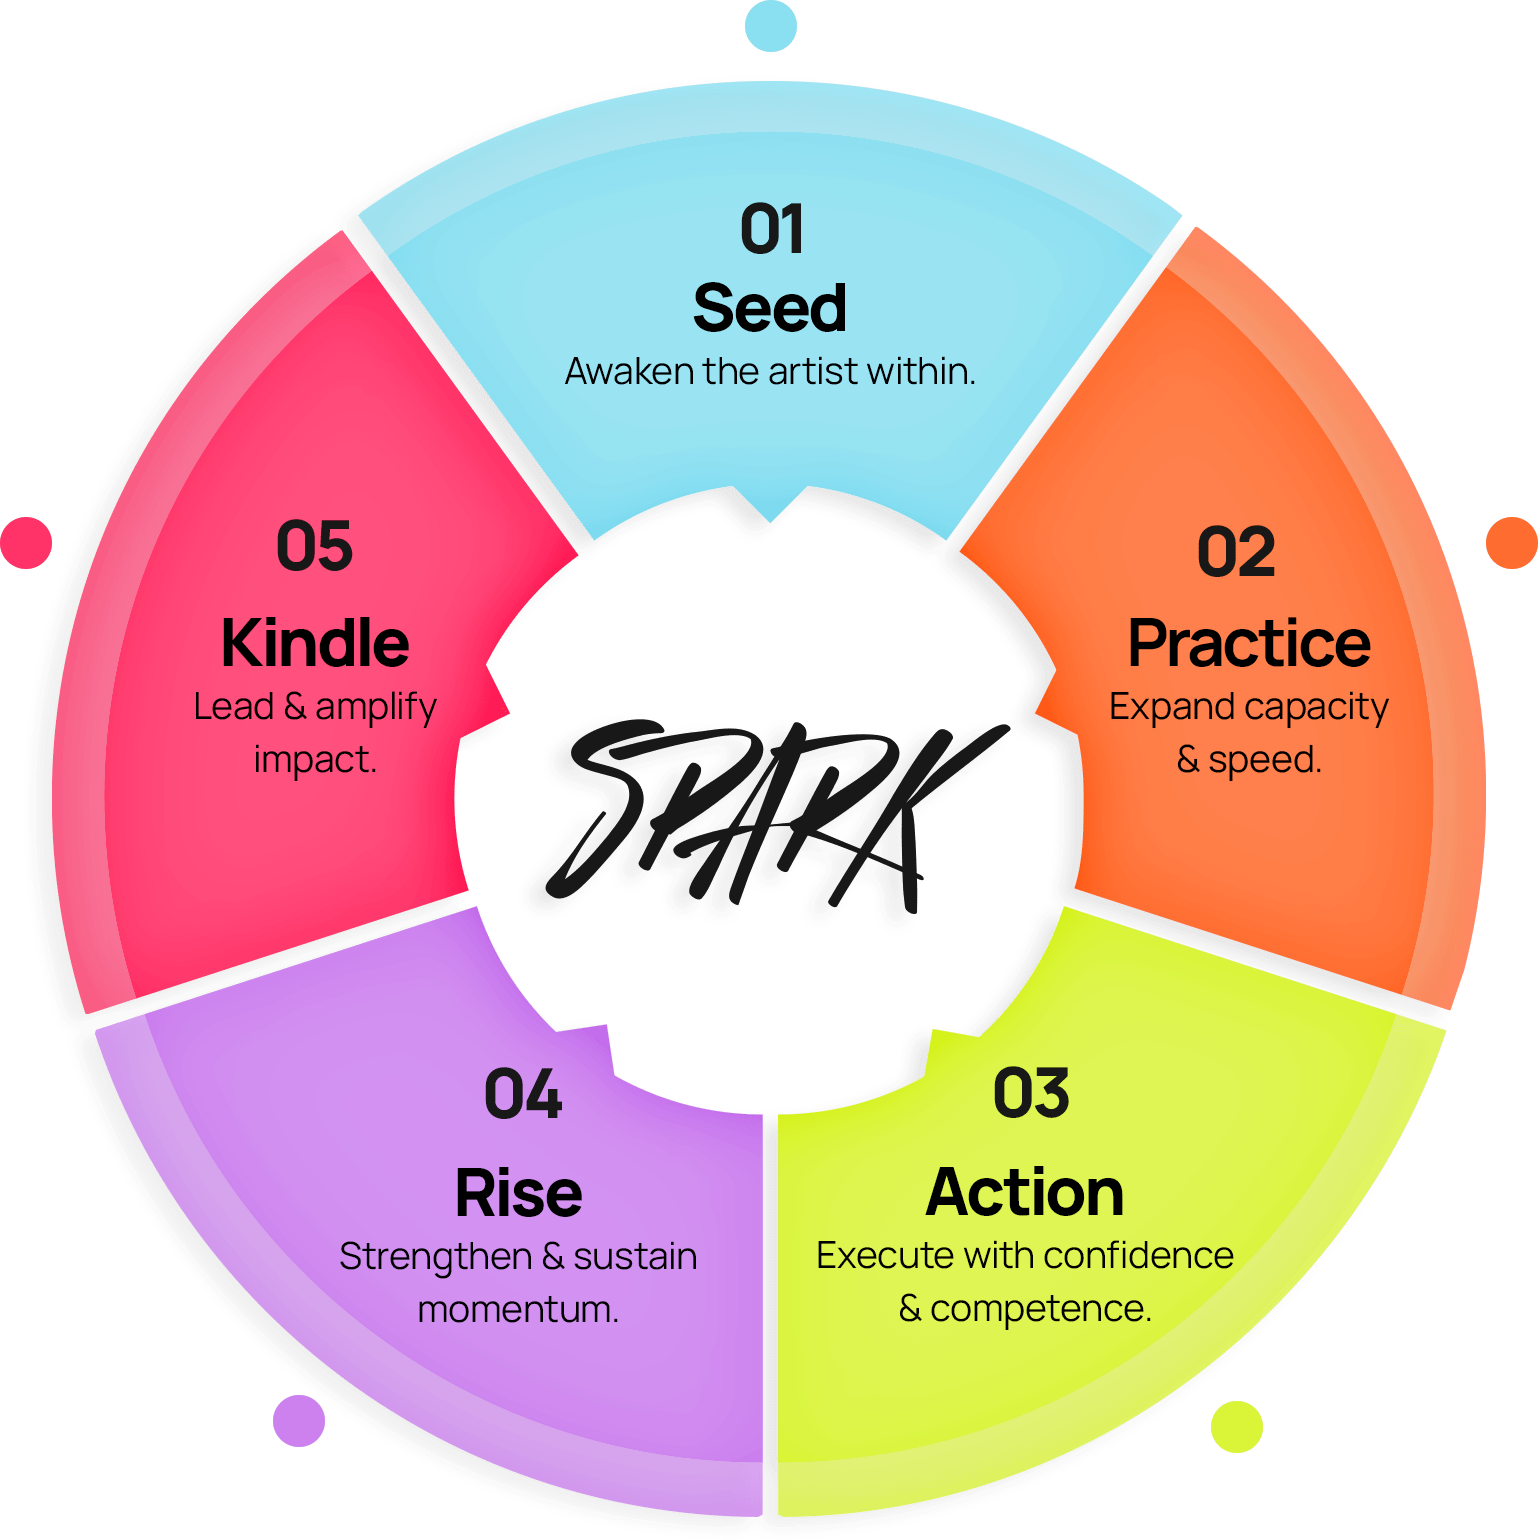 SPARK model 01 Seed - Awaken the artist within 02 Practice - Expand capacity & speed 03 Action - Execute with confidence & competence 04 Rise - Strengthen & sustain momentum 05 Kindle - Lead & amplify impact